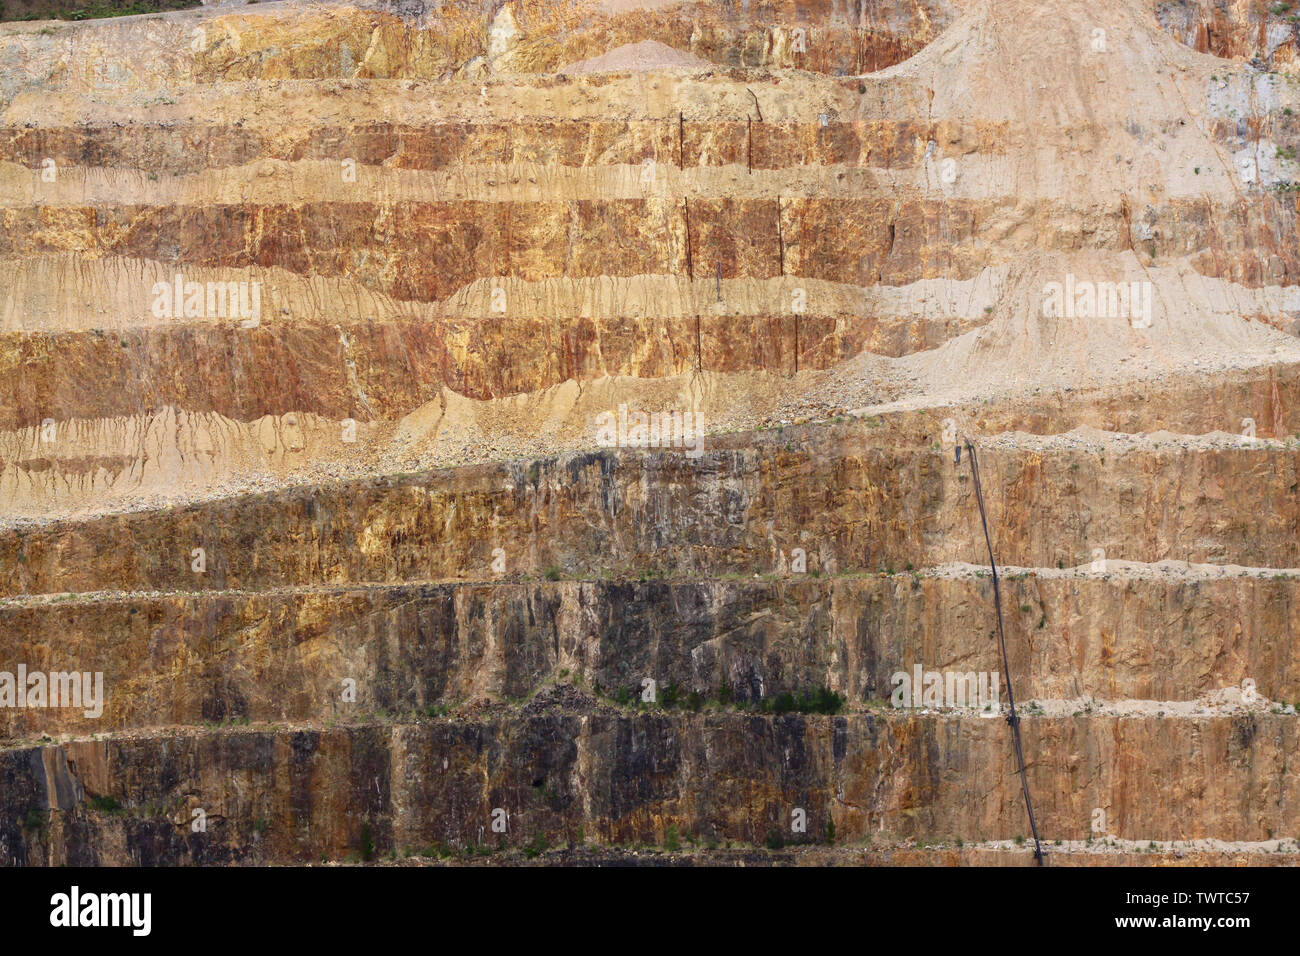 The Martha Mine is a gold mine in the New Zealand town of Waihi. The picture shows the terraces of the open-cast gold mine. Stock Photo